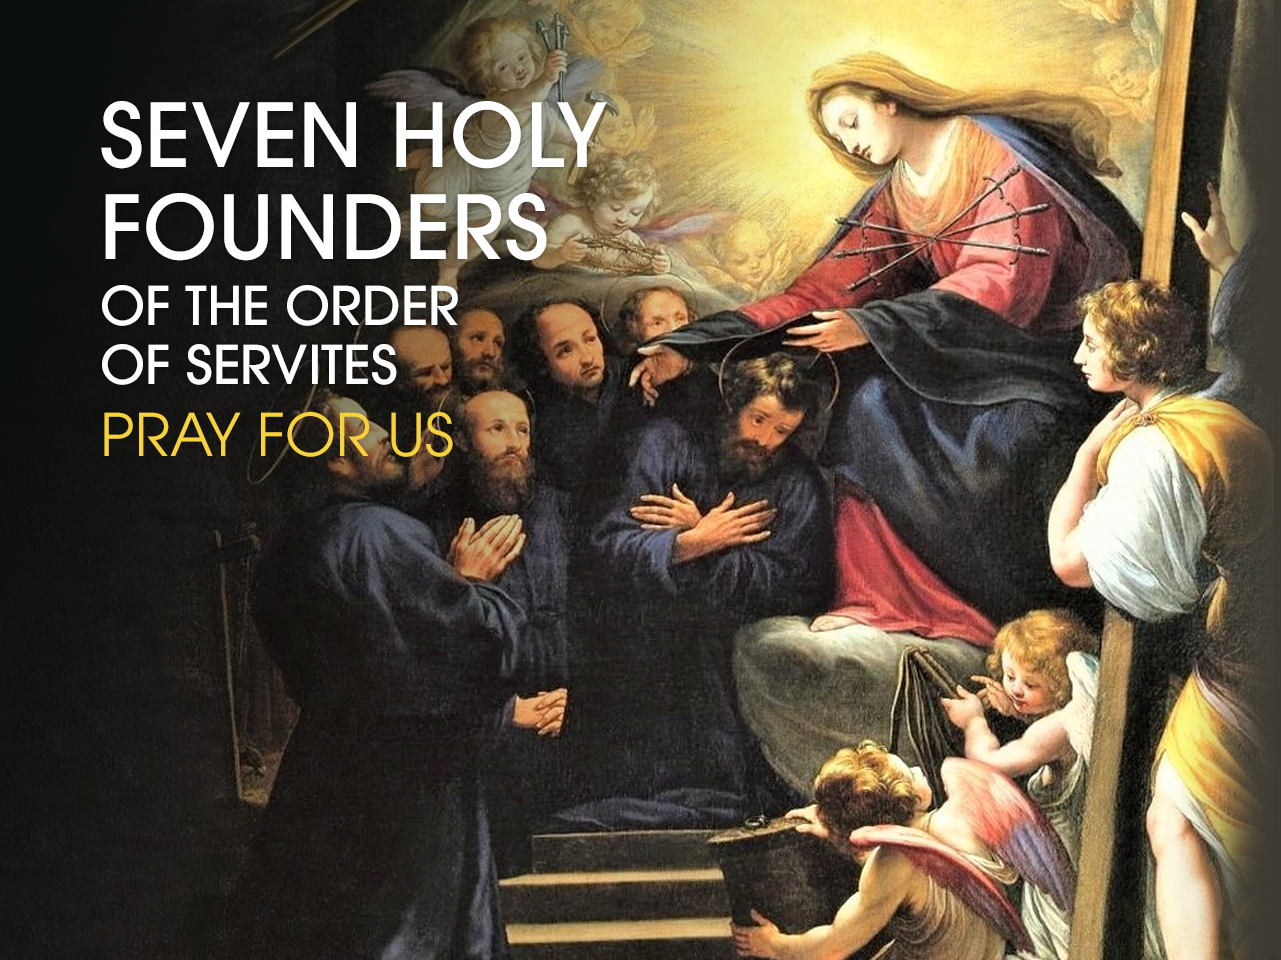 St. Manettus and the Seven Founders of the Order of Servites